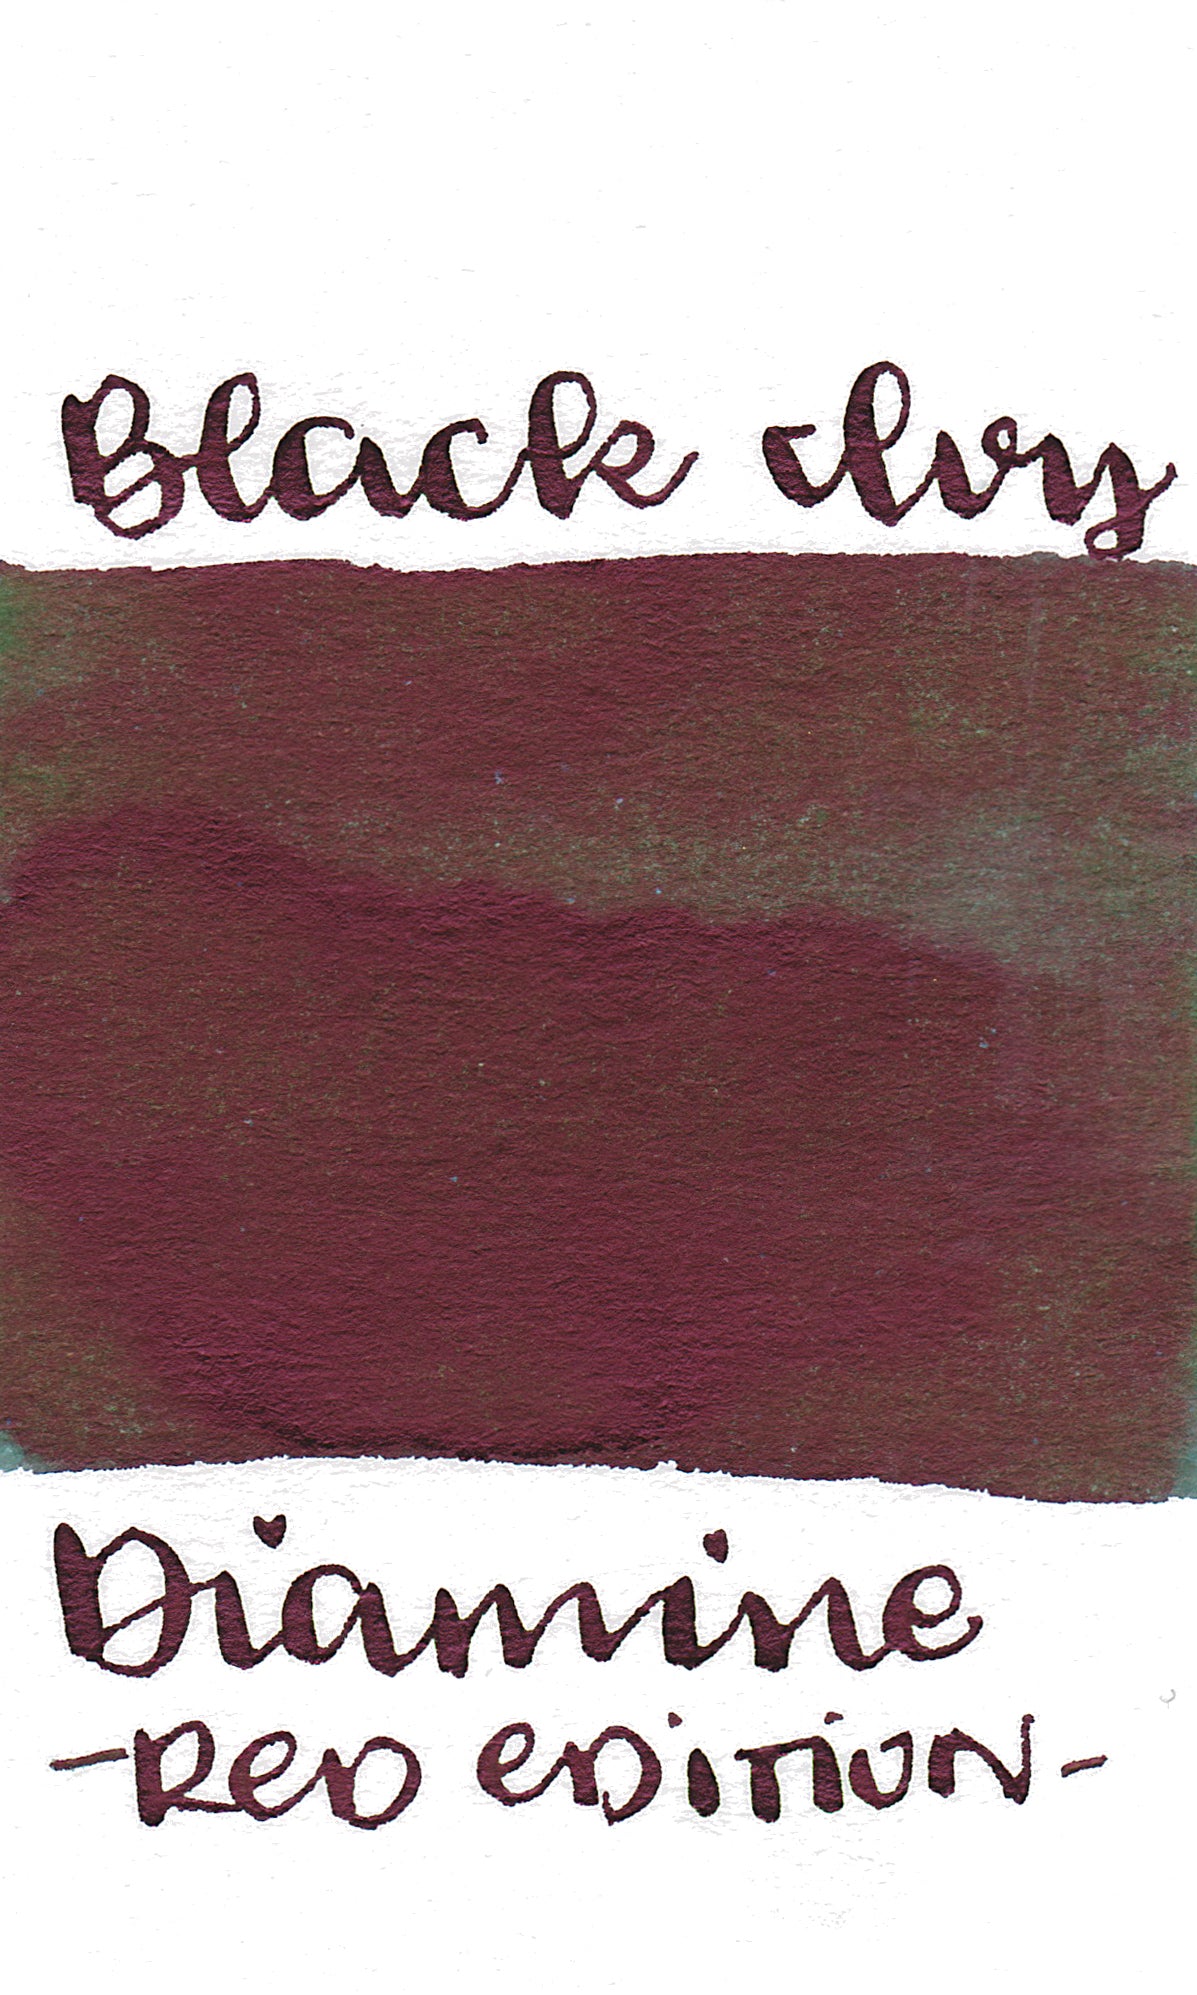 Diamine Red Edition Black Ivy Sheen